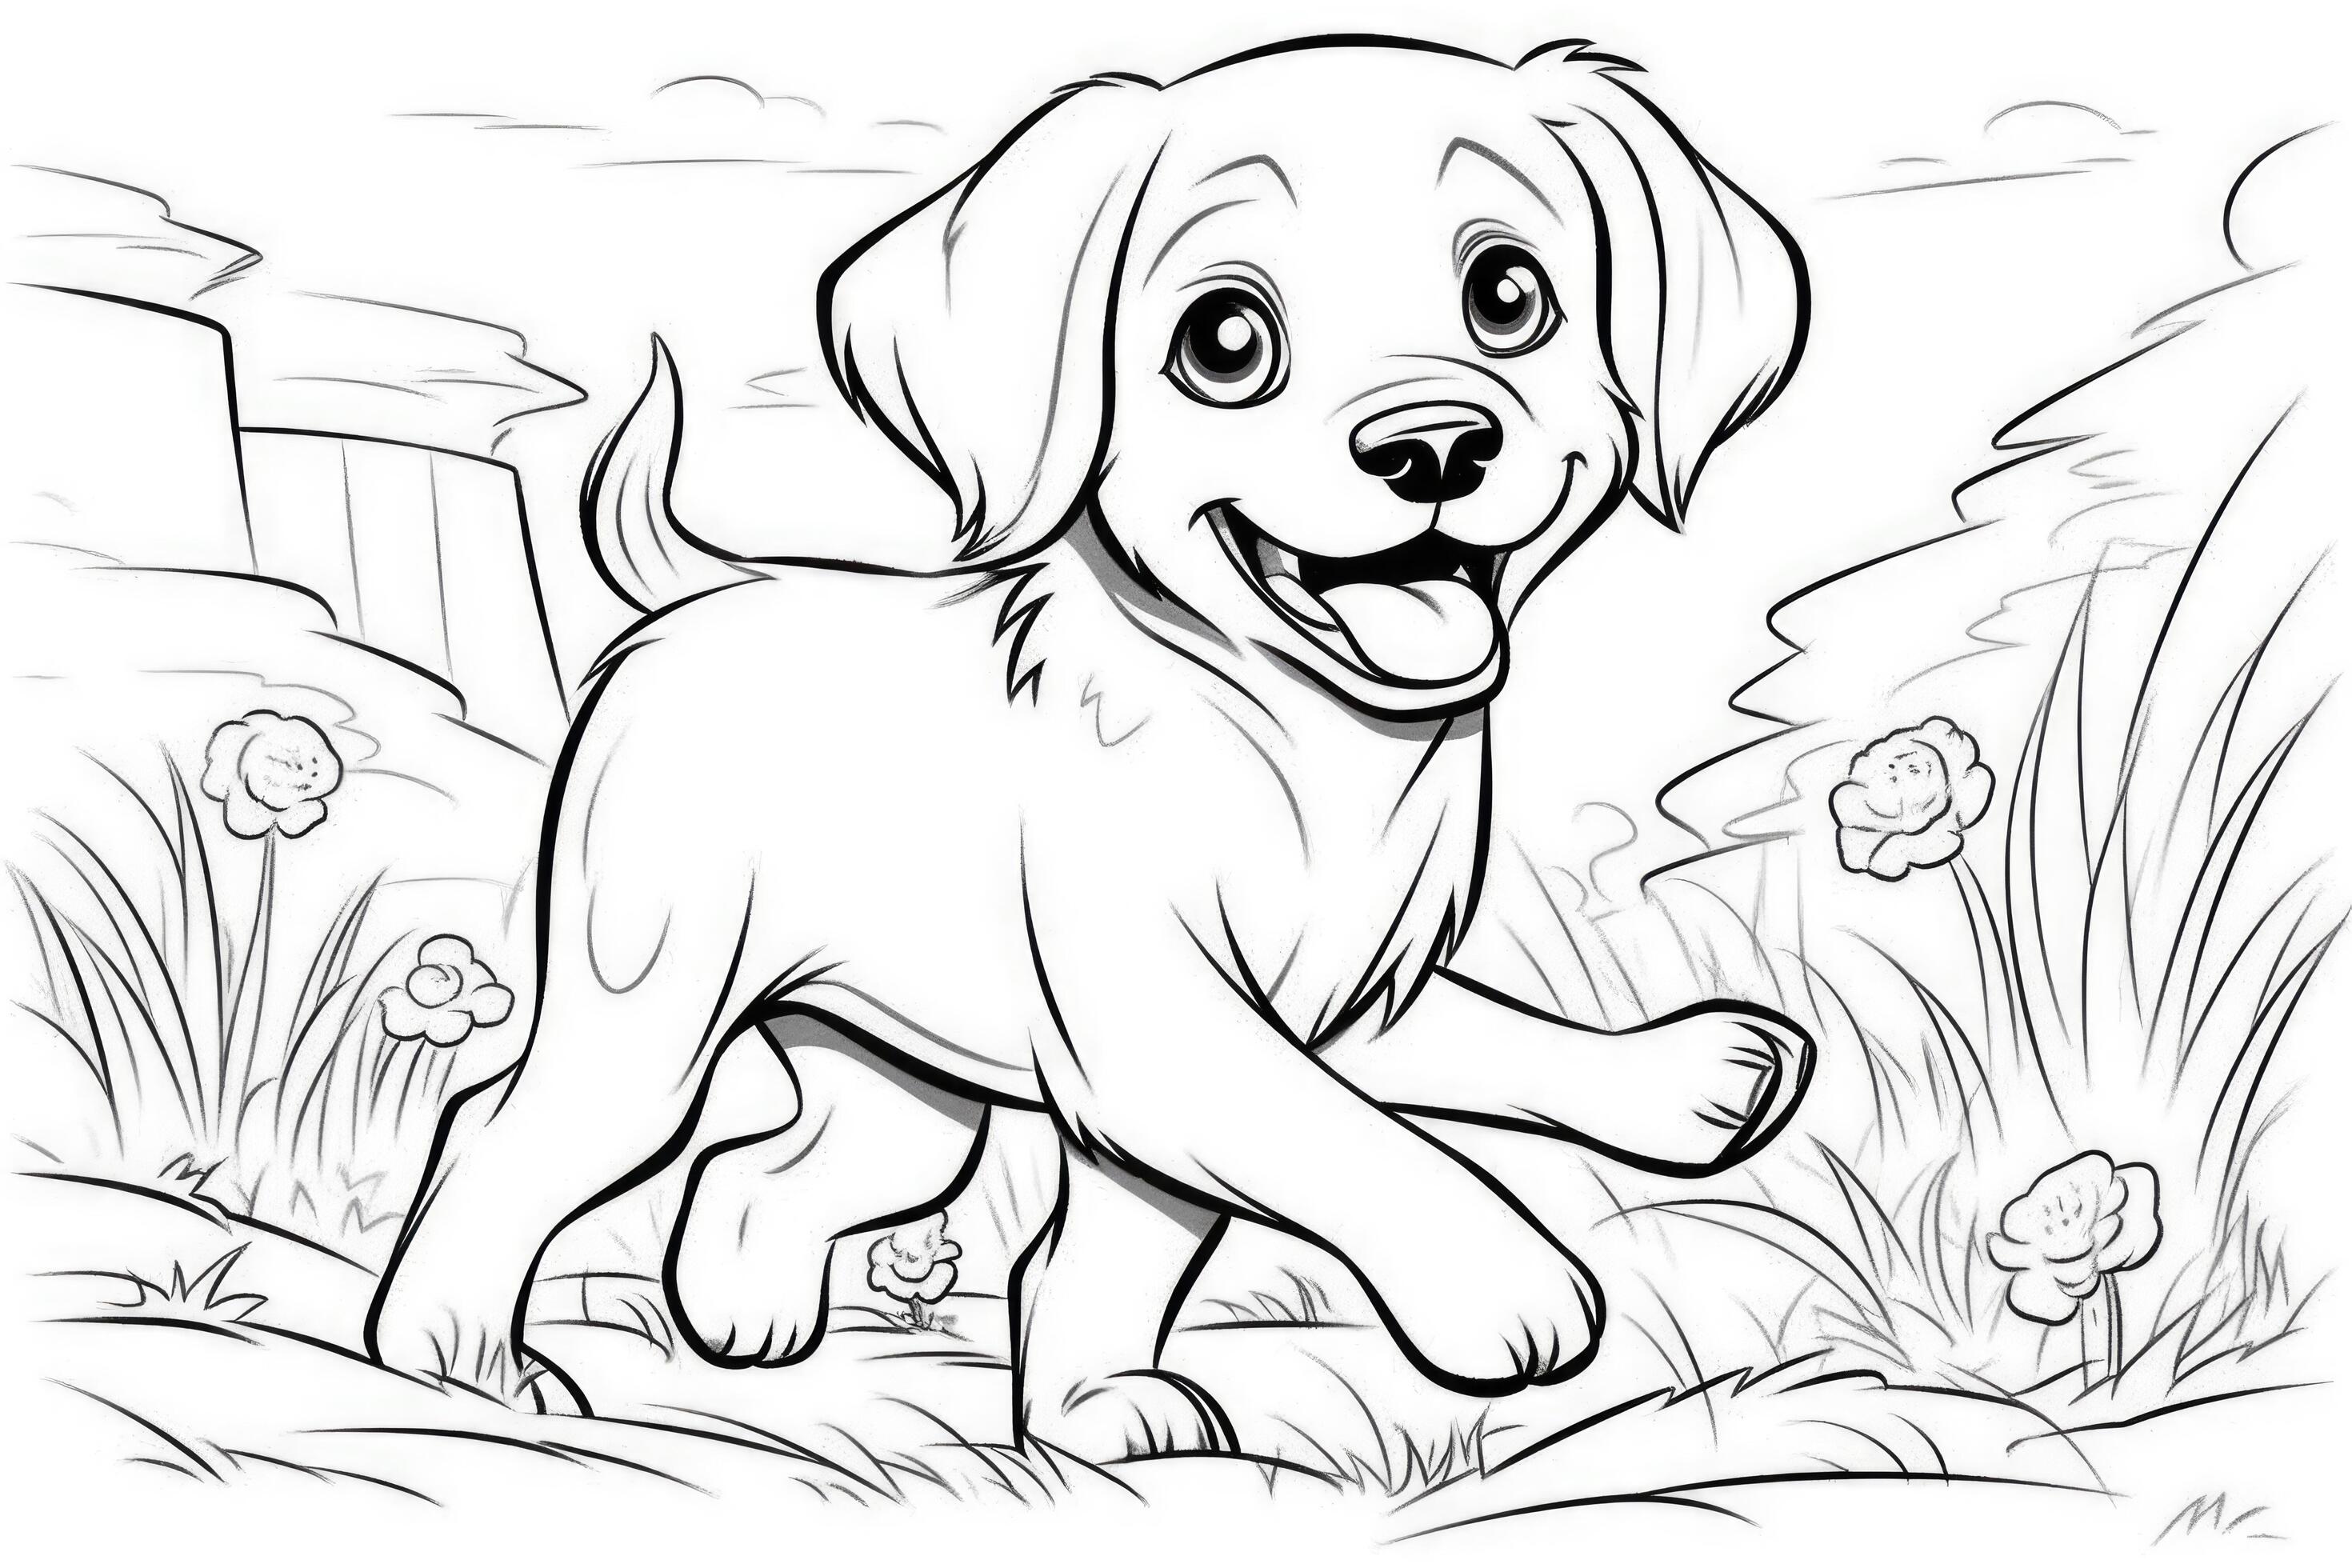 My First Copy Colouring Book - Puppy